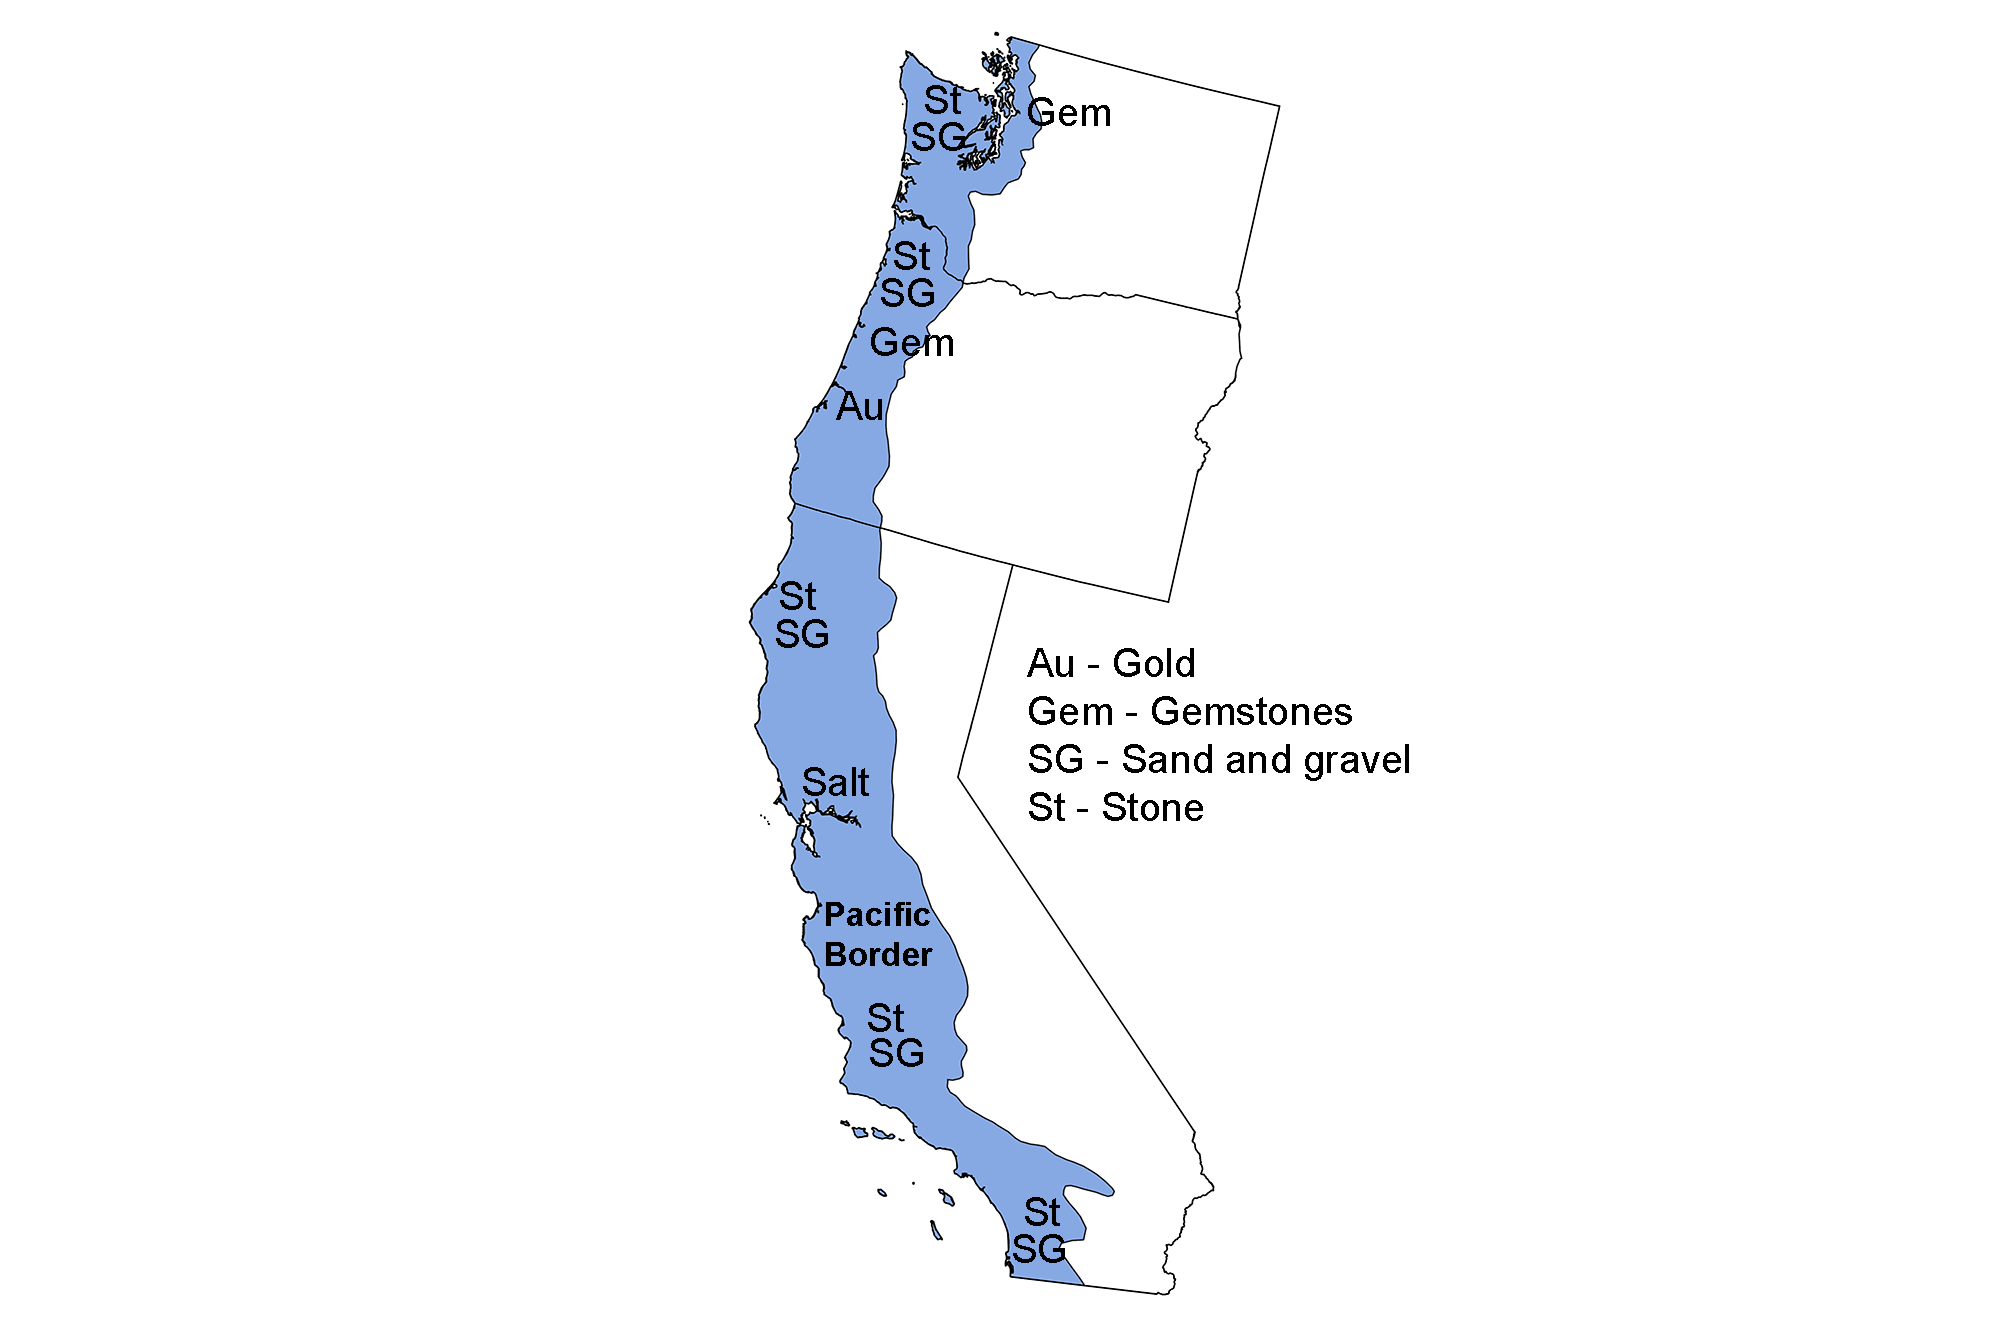 Map showing the locations of mineral resources in the Pacific Border region of the western United States.